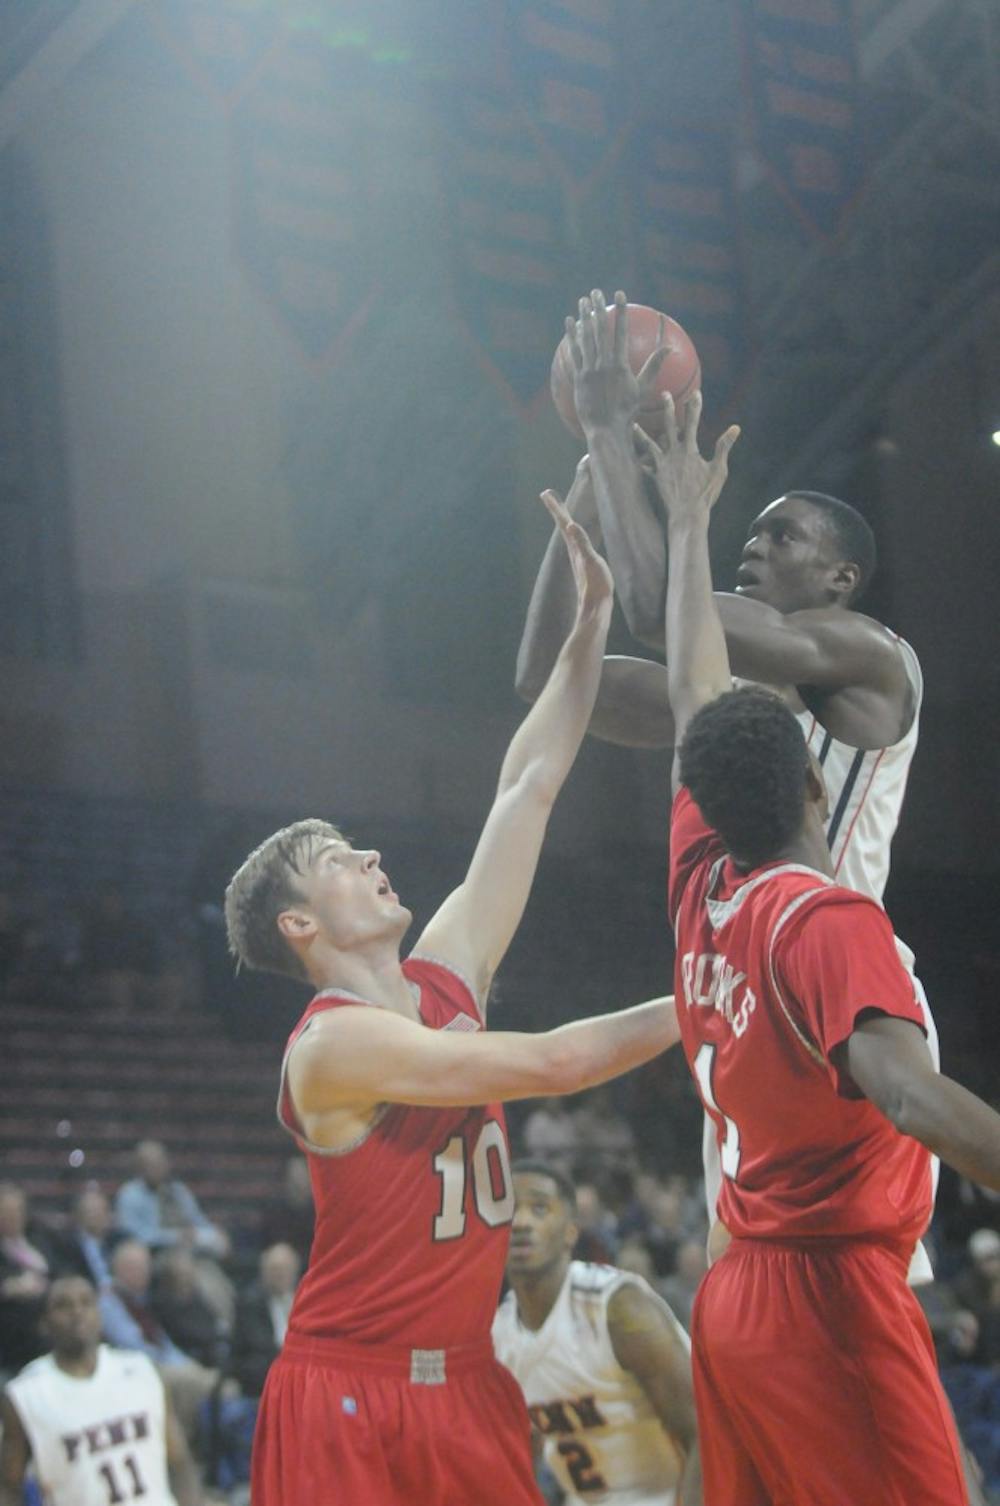 Senior forward Greg Louis narrowly missed out on a double-double against Marist on Dec. 9.